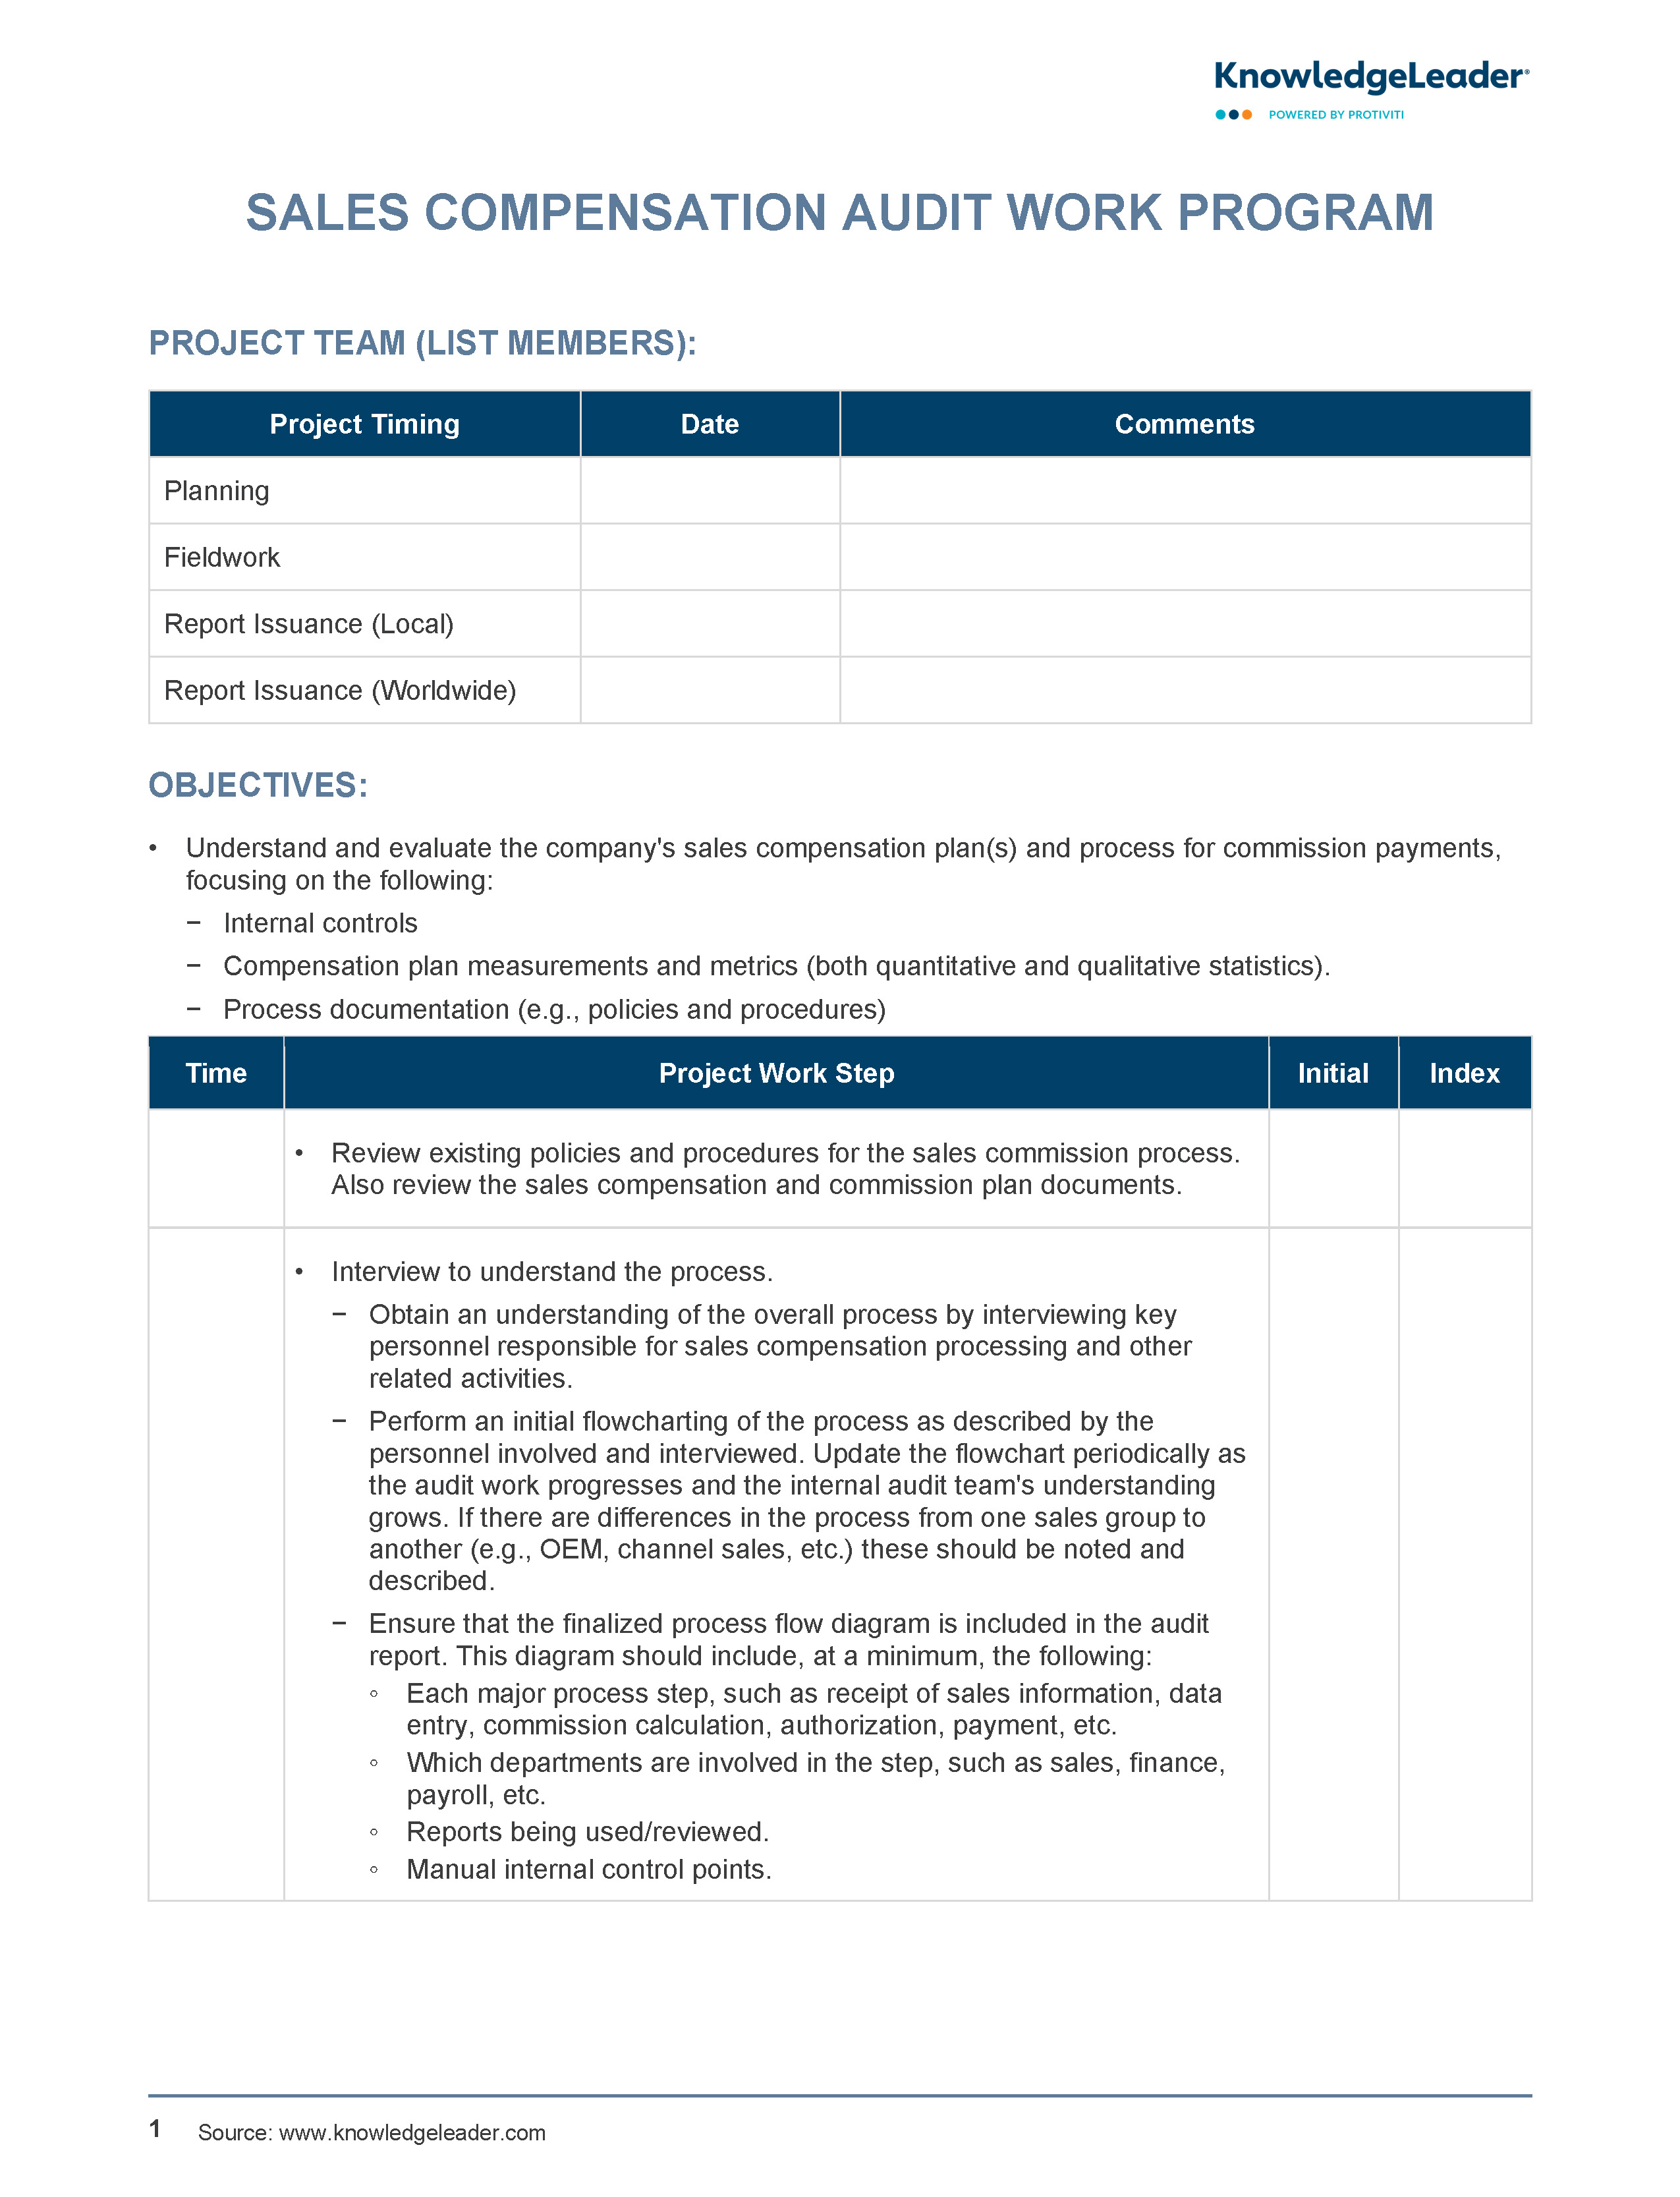 Screenshot of the first page of Sales Compensation Work Program